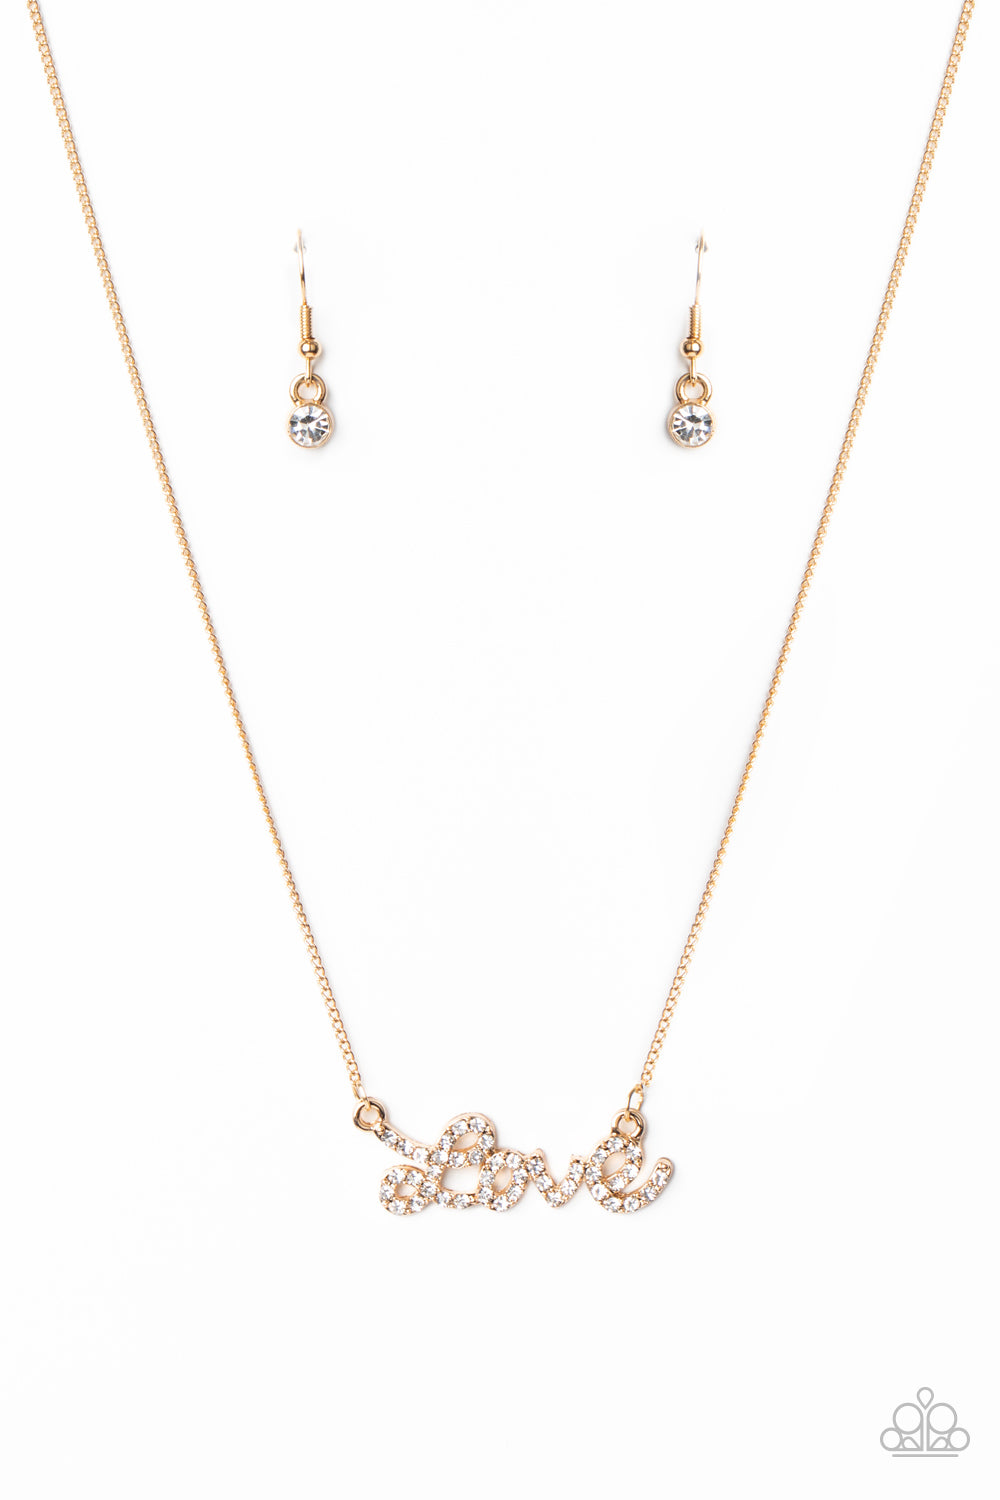 Head Over Heels in Love - Gold - Paparazzi Necklace